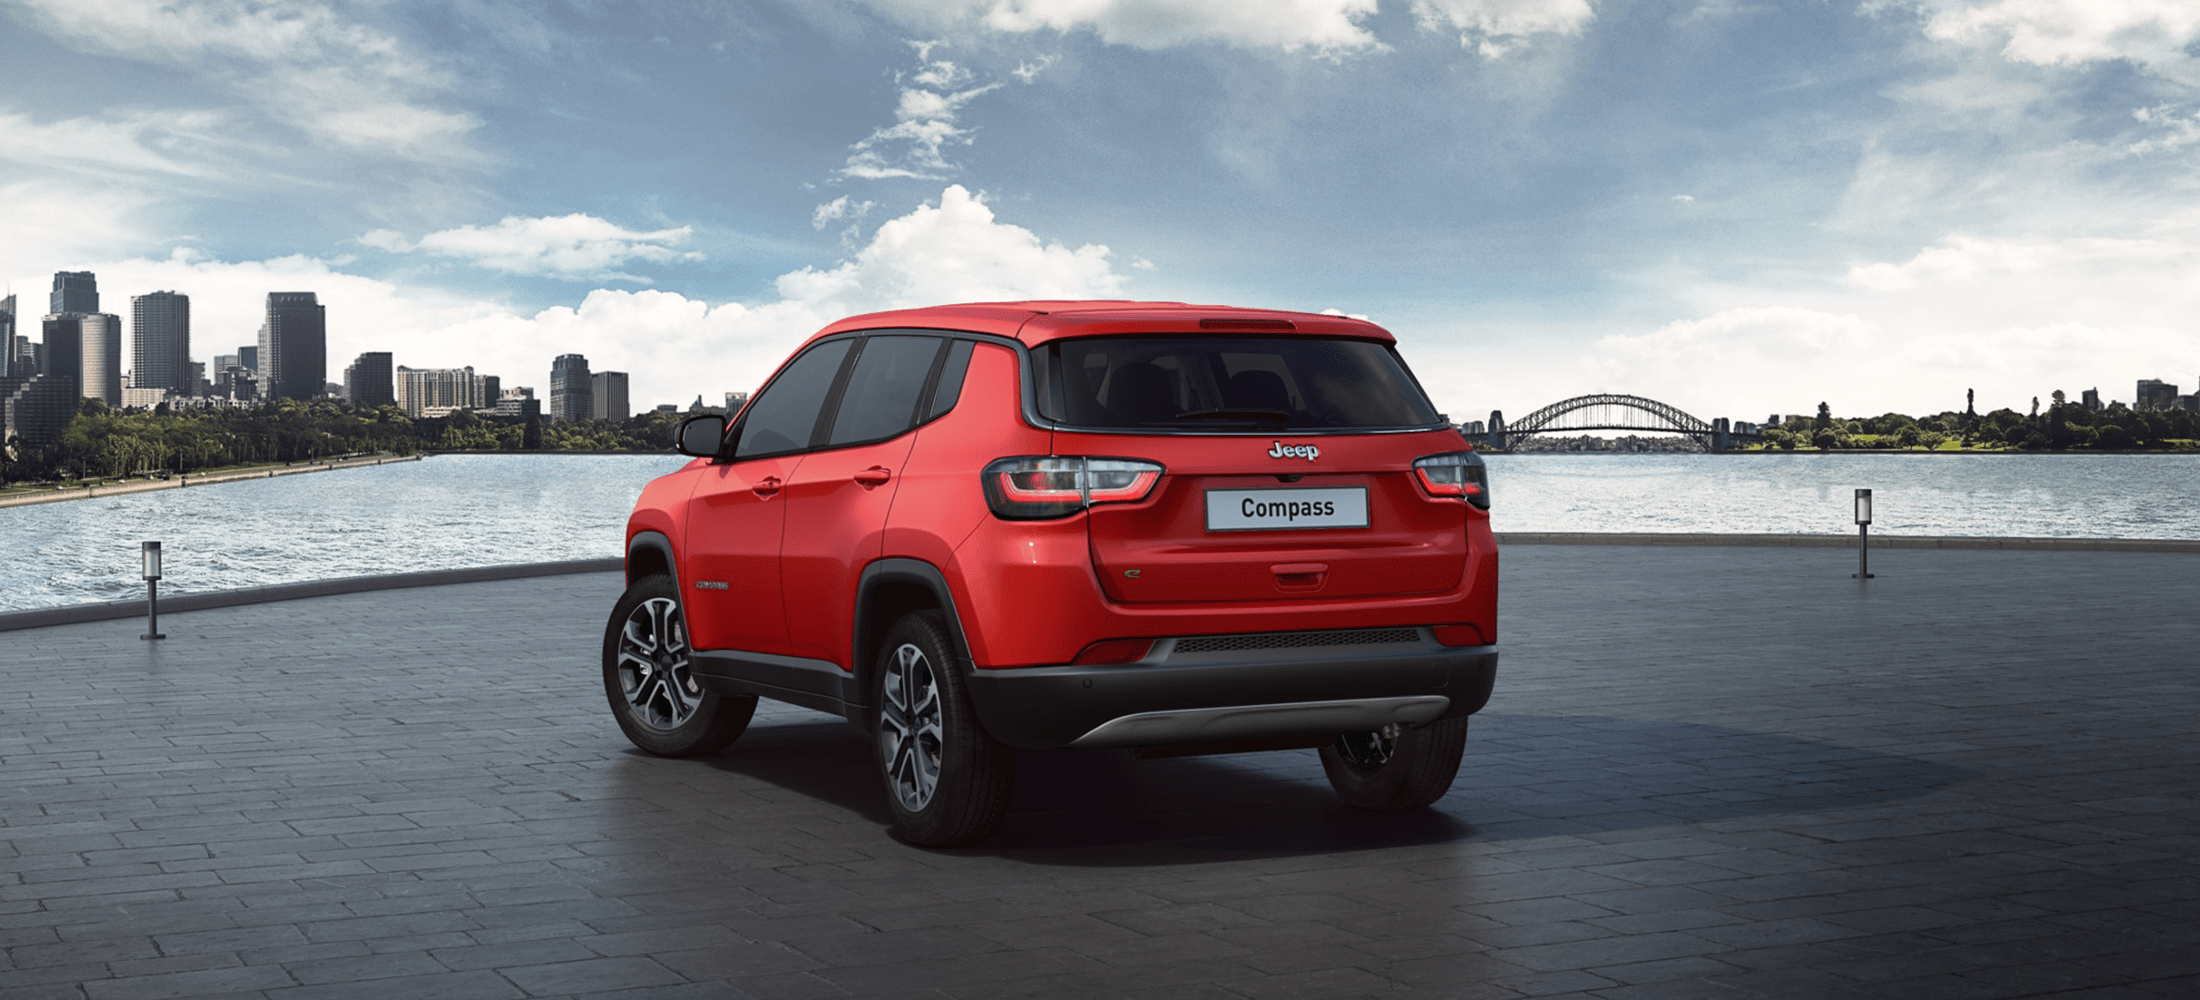 Jeep Compass Heck